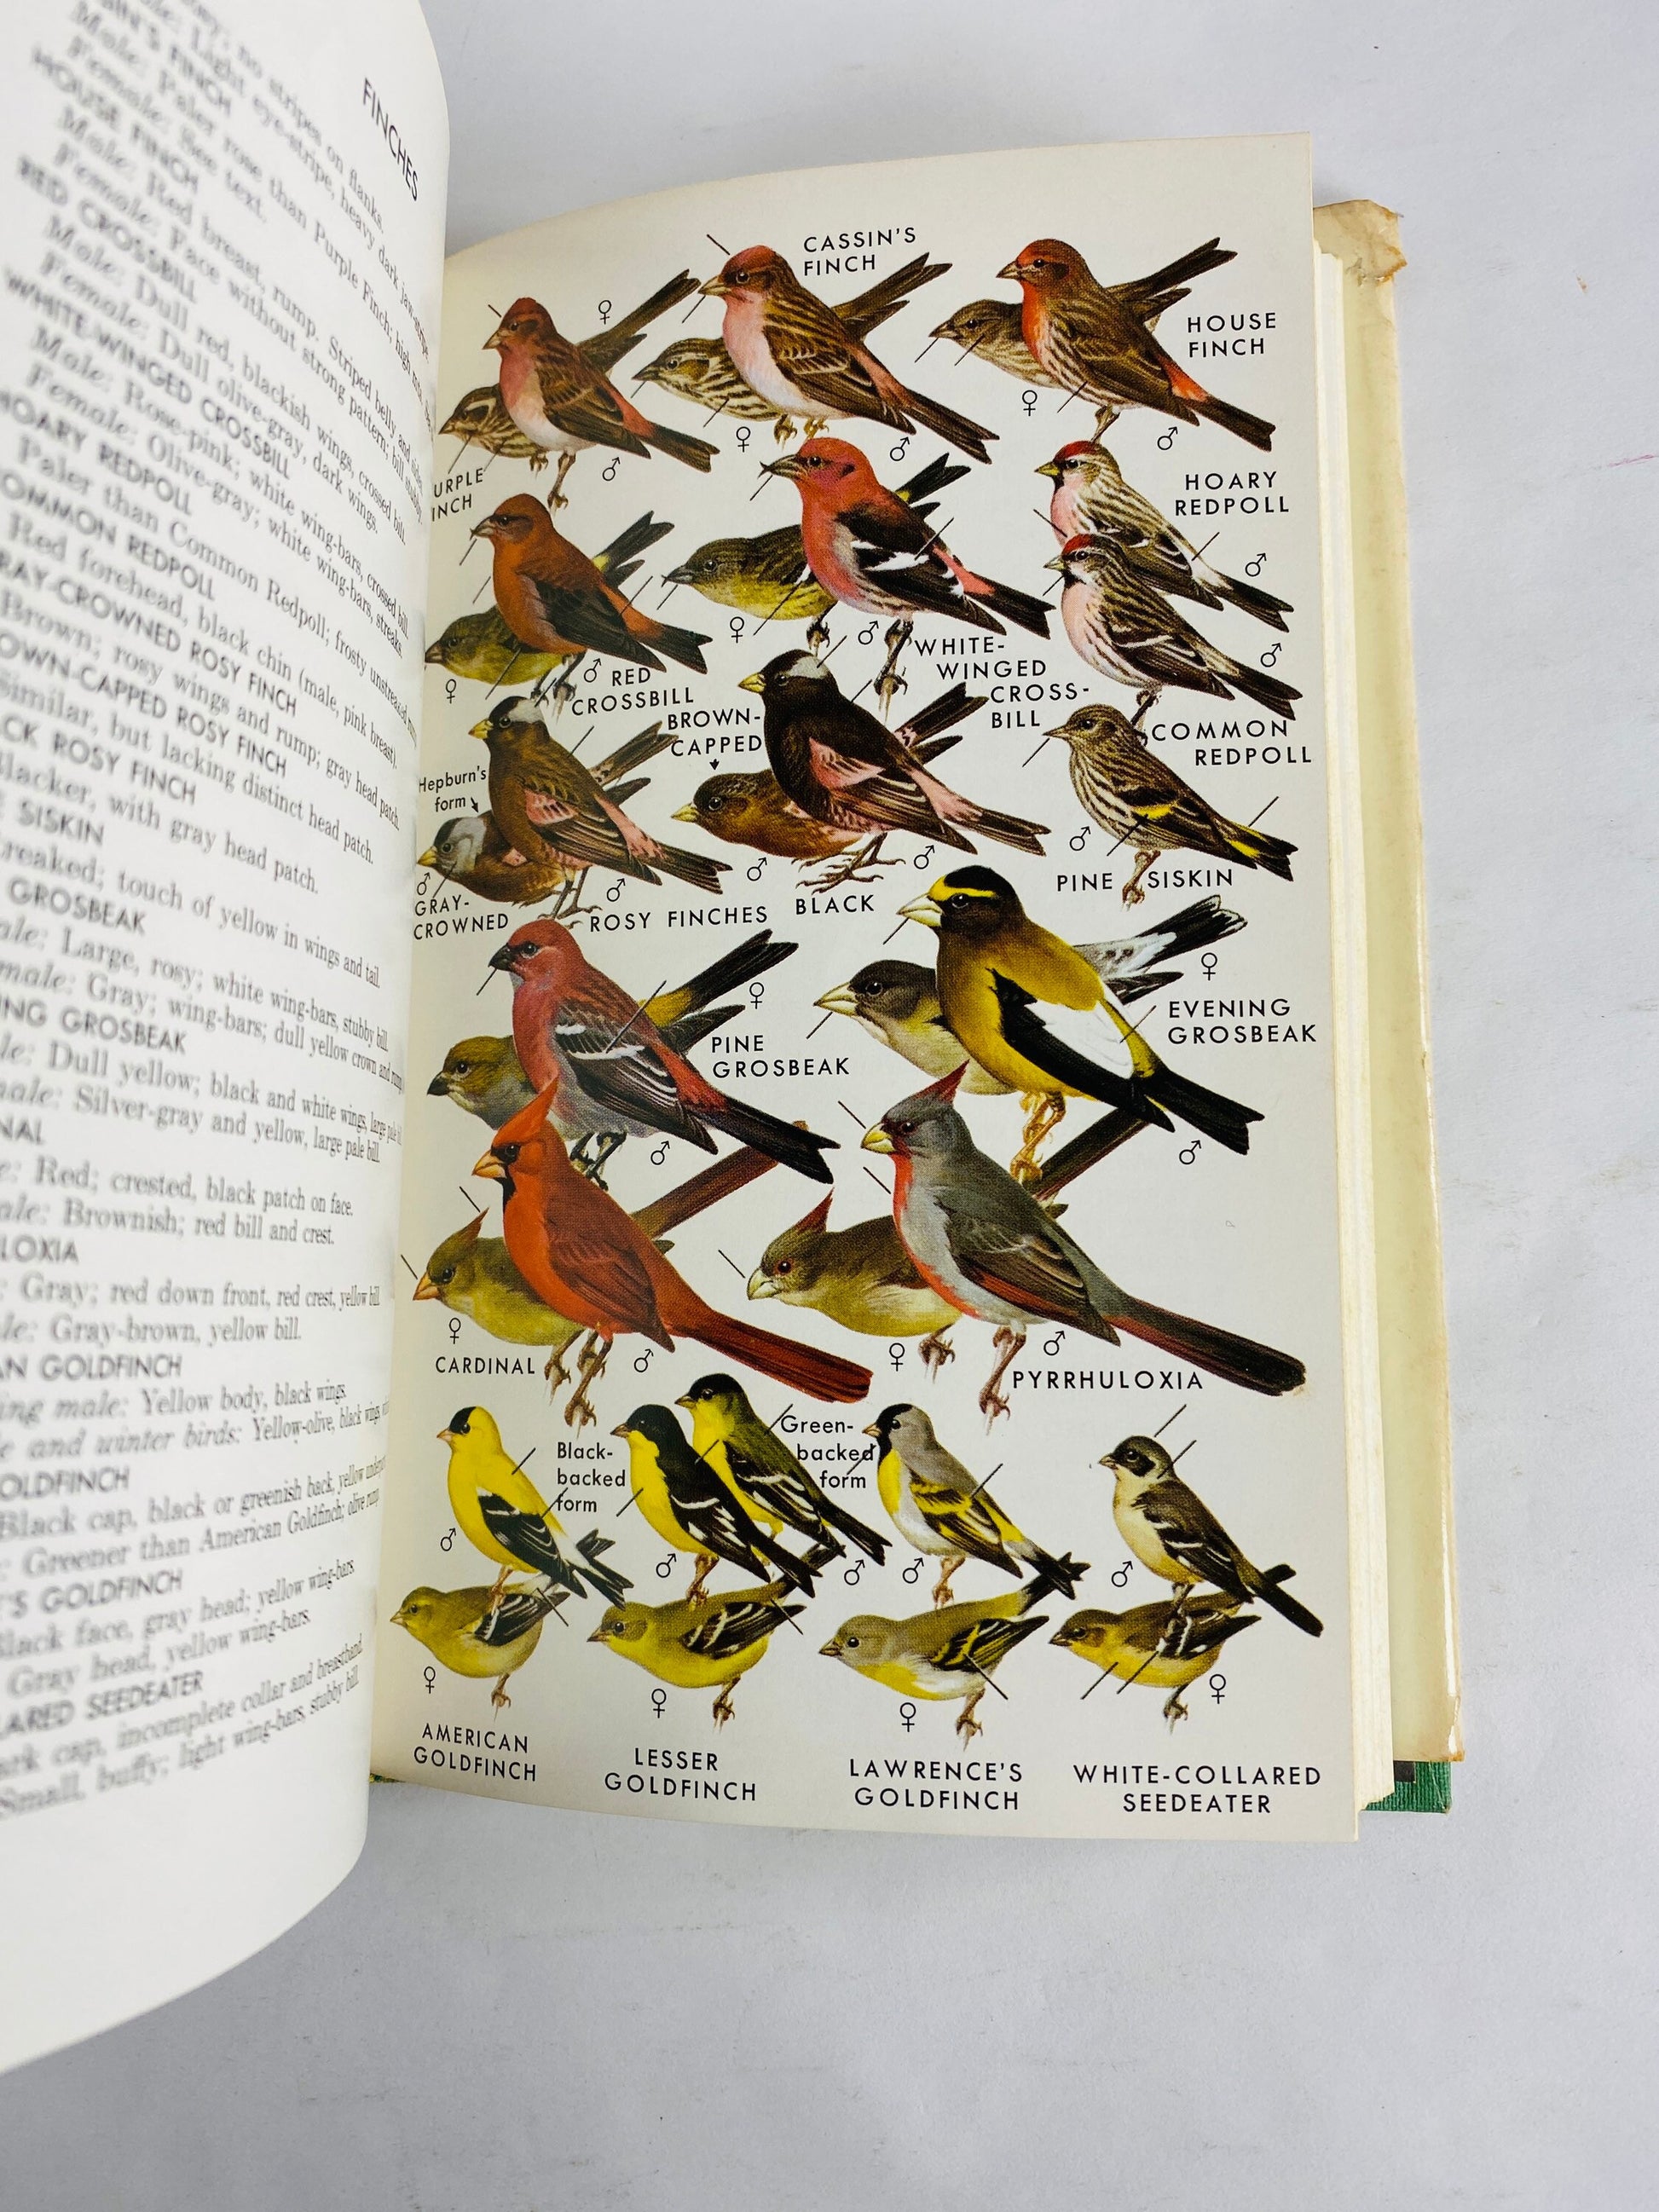 1978 Western Birds Field Guide to Identification by Roger Tory Peterson. Vintage book National Audubon Society